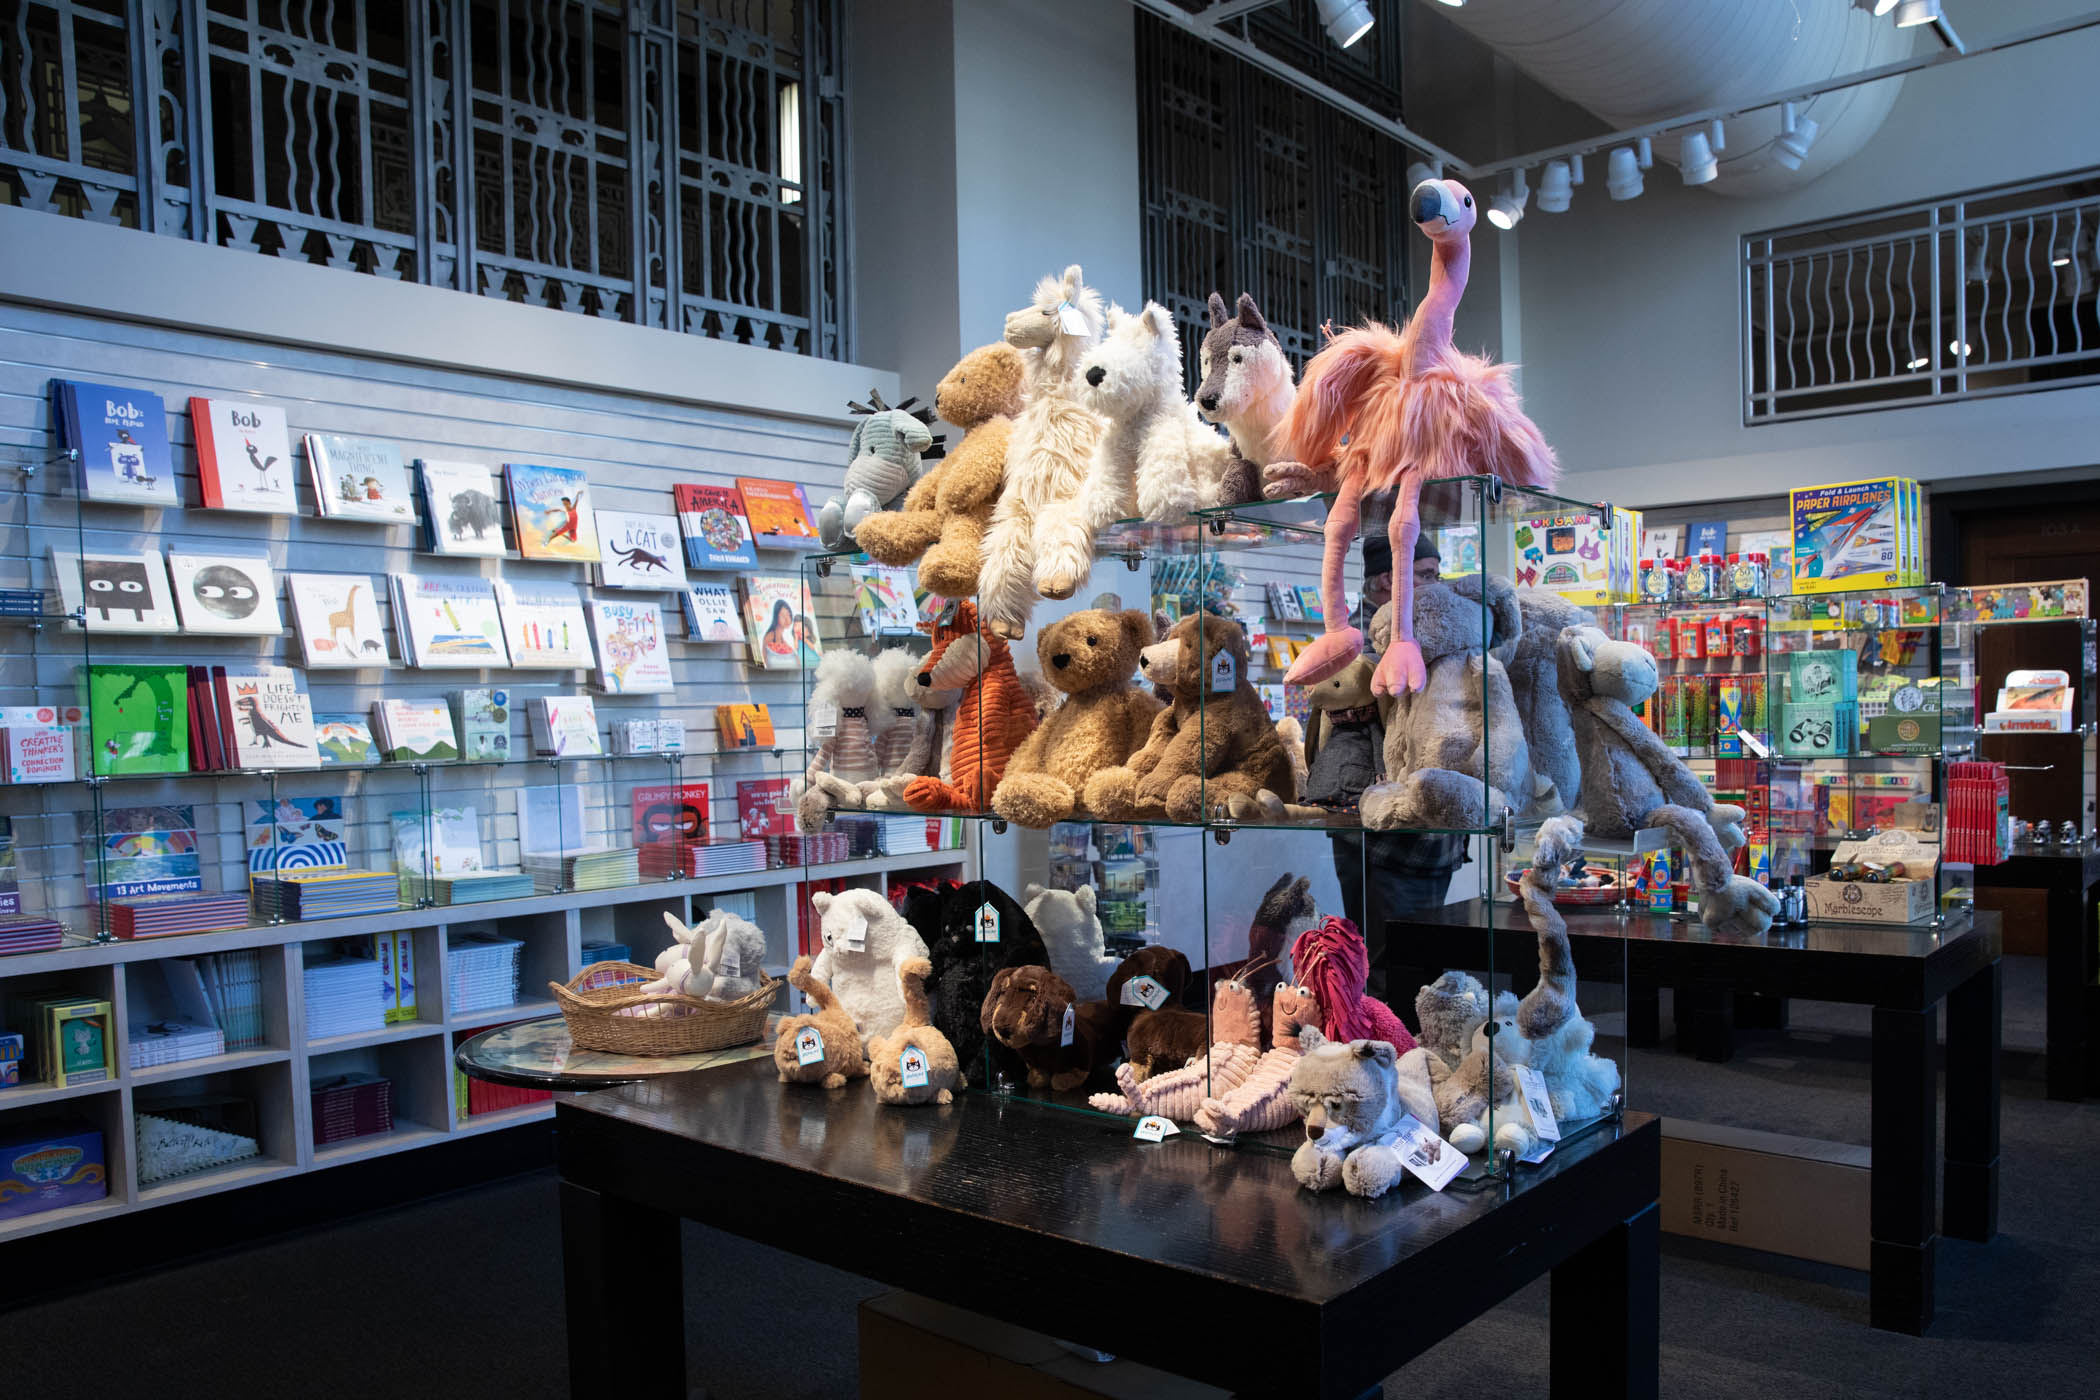 Wide shot of a large shelf with an assortment of stuffed animals